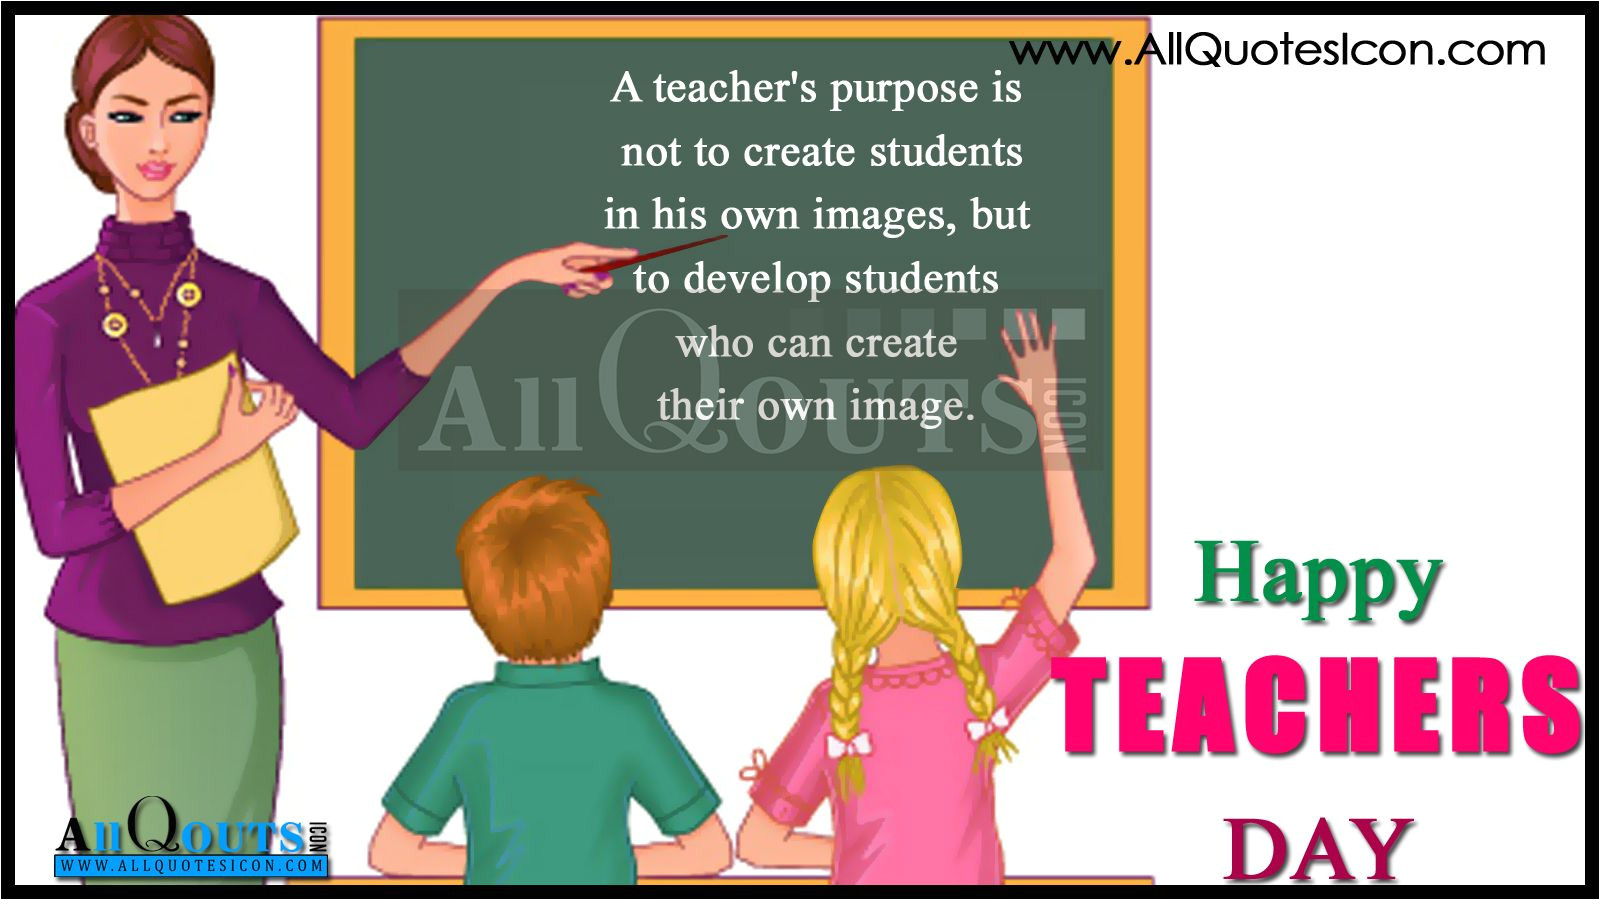 Teachers Day Card Edit Name 33 Teacher Day Messages to Honor Our Teachers From Students